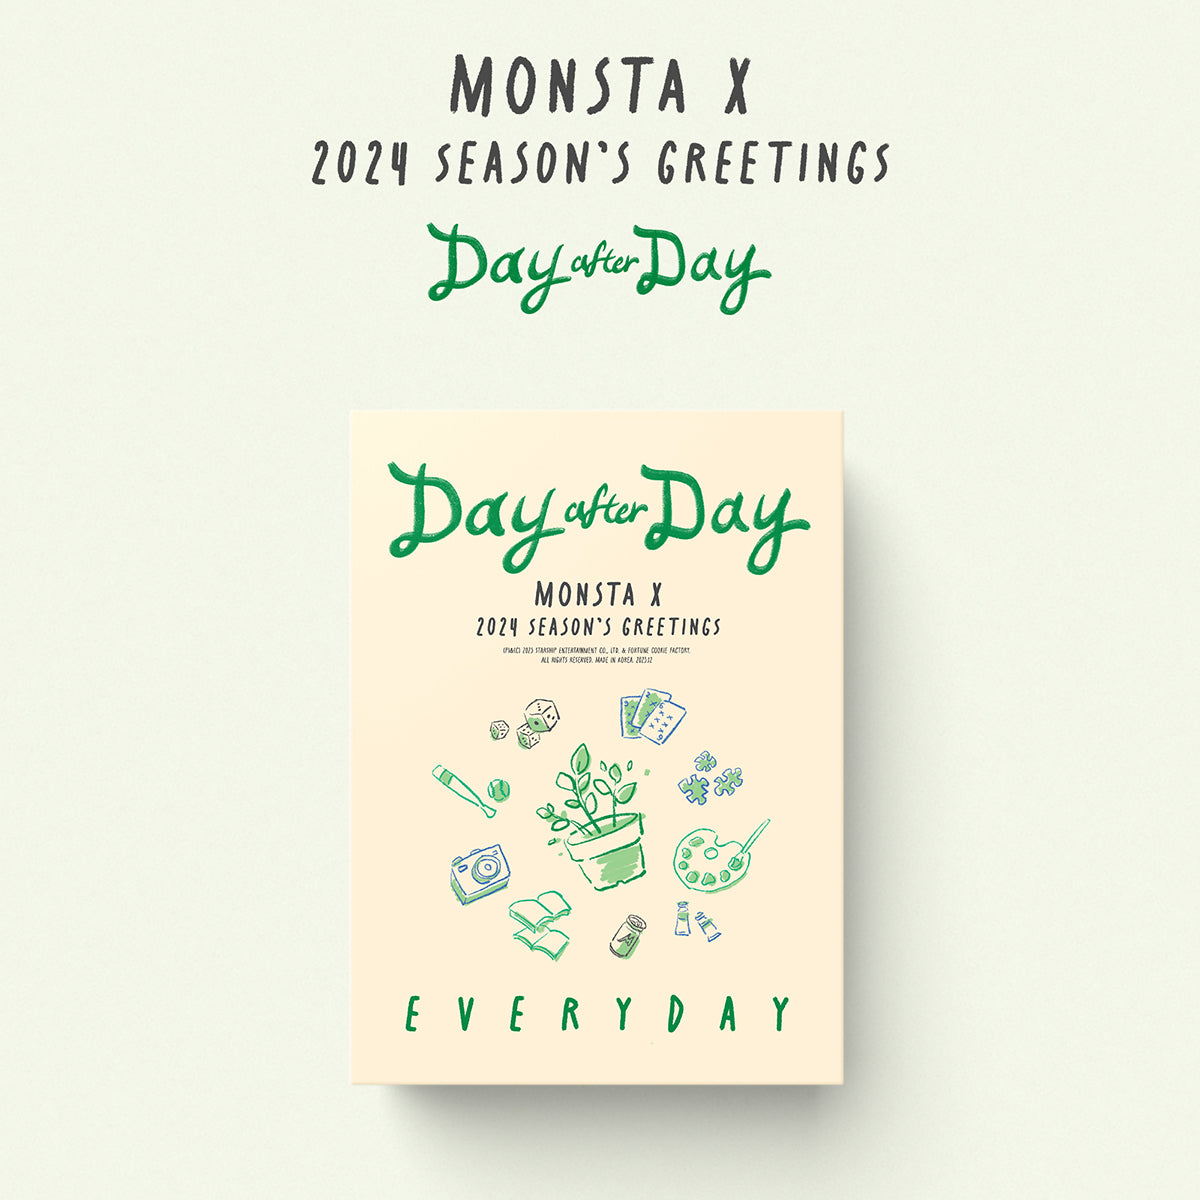 MONSTA X - 2024 SEASON'S GREETINGS [Day after Day] (EVERYDAY ver.) [PRE-ORDER]